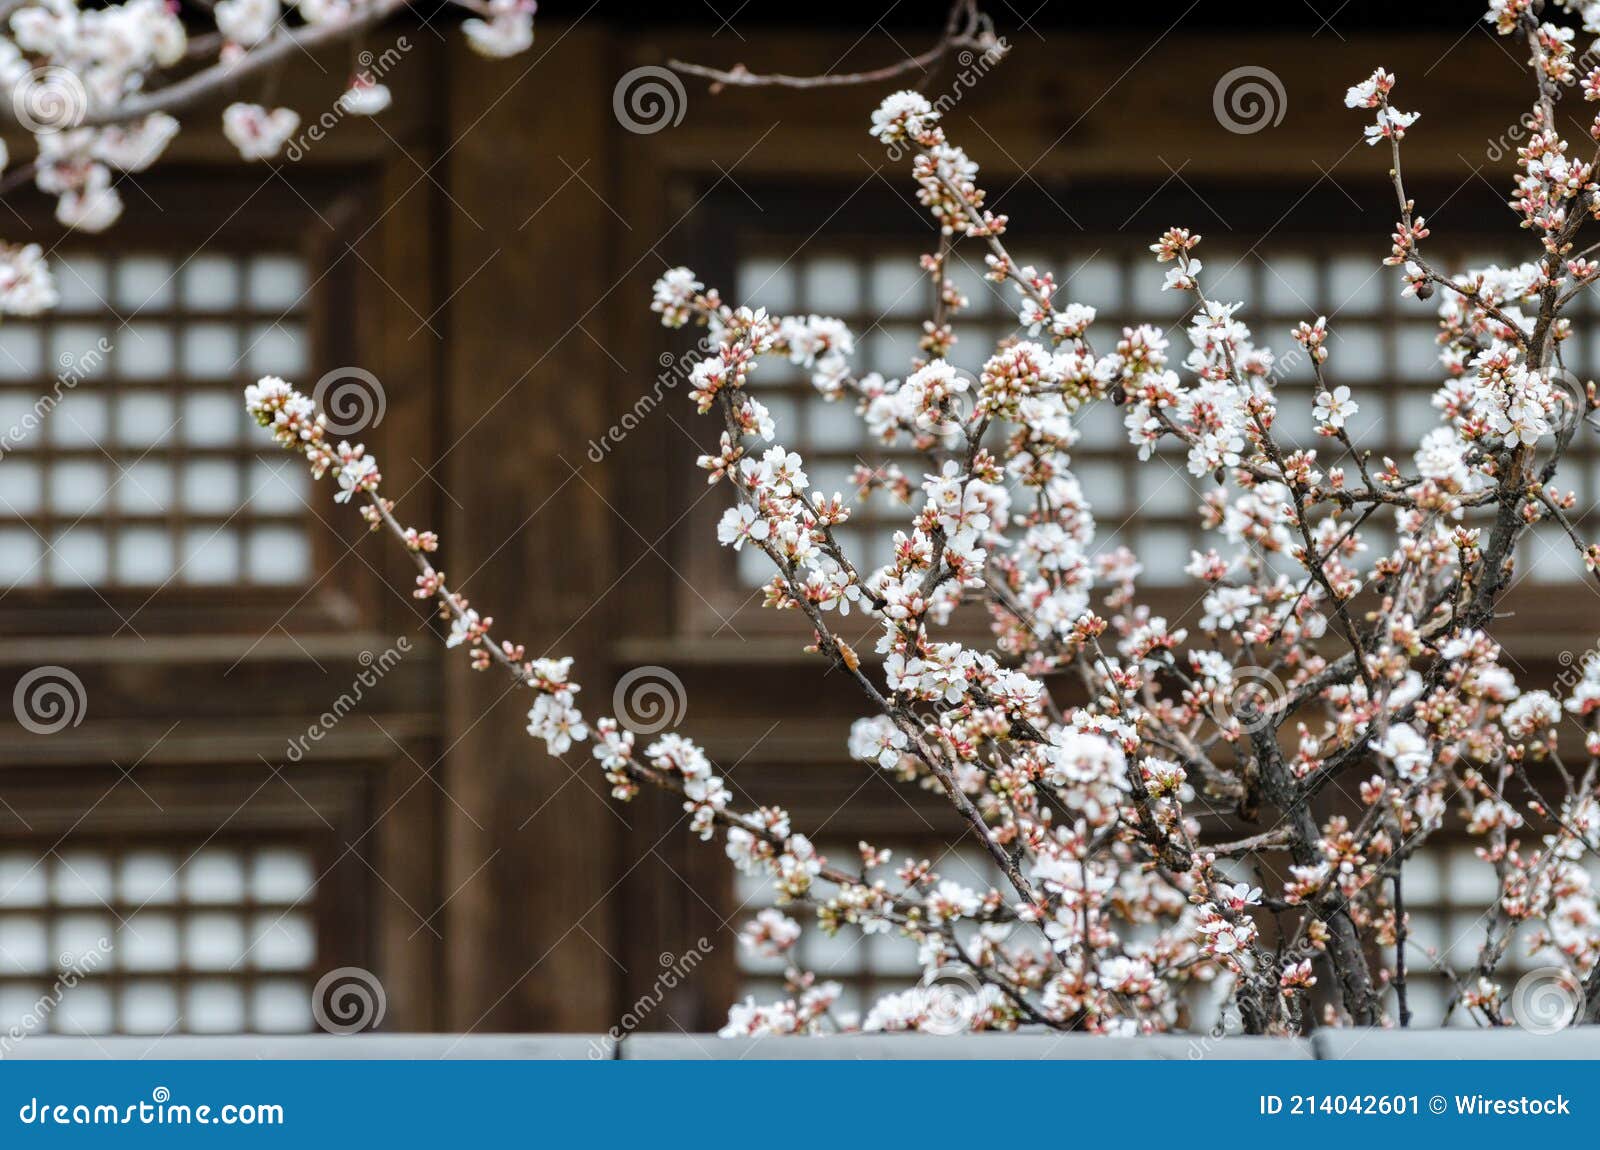 cherry blossoms trees in a garden at seoul, south korea.